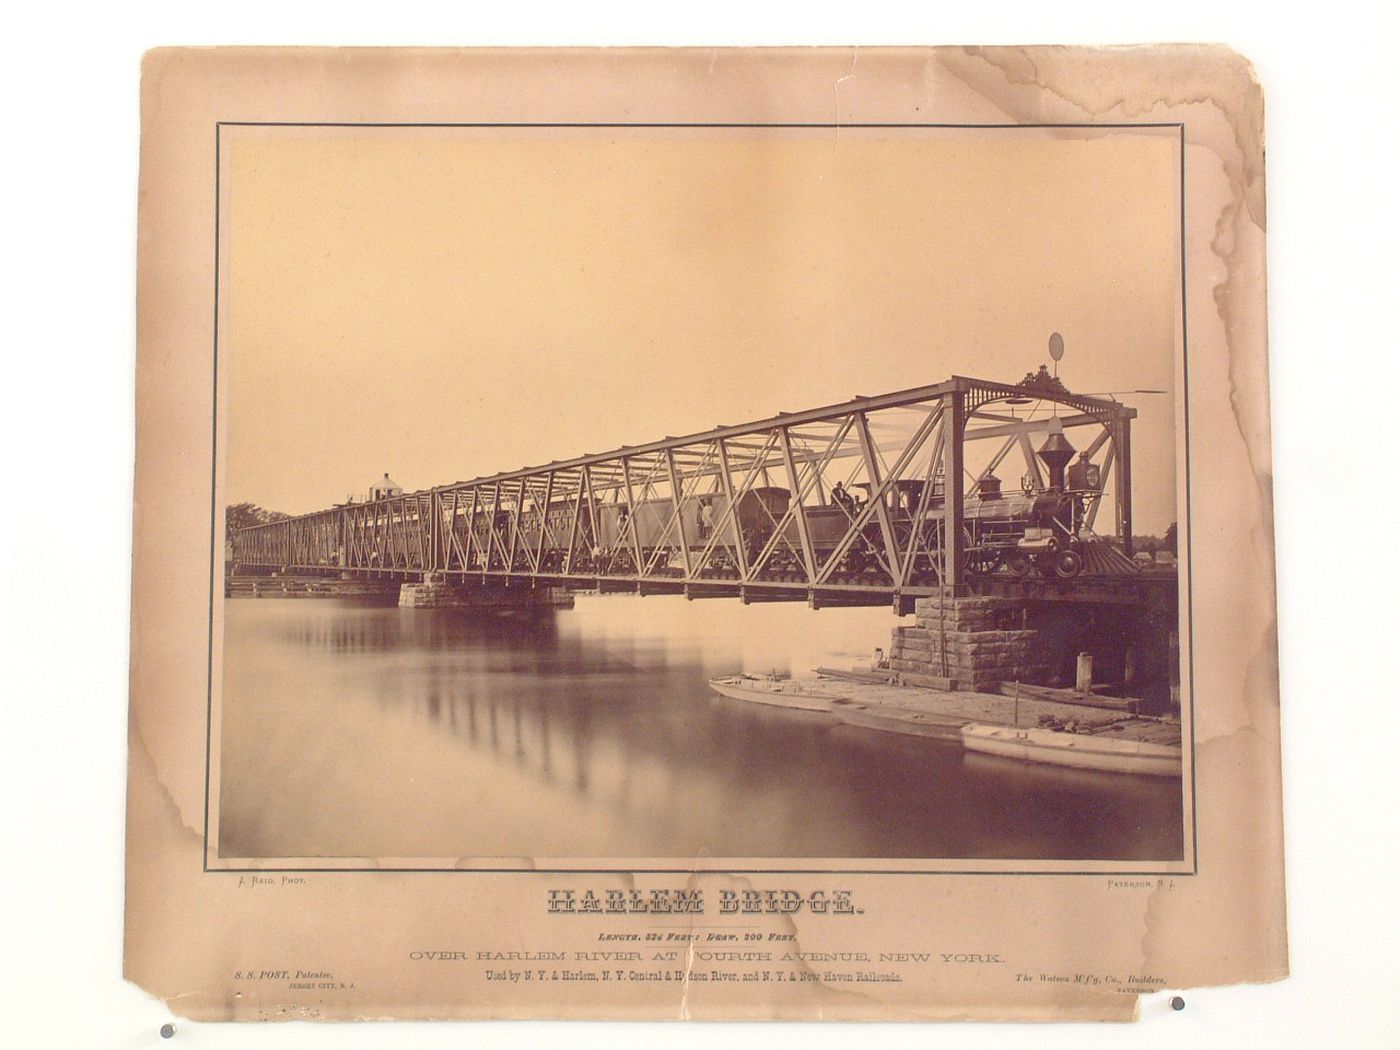 View of the Harlem Bridge showing a train, people and the Harlem River, New York City, New York, United States